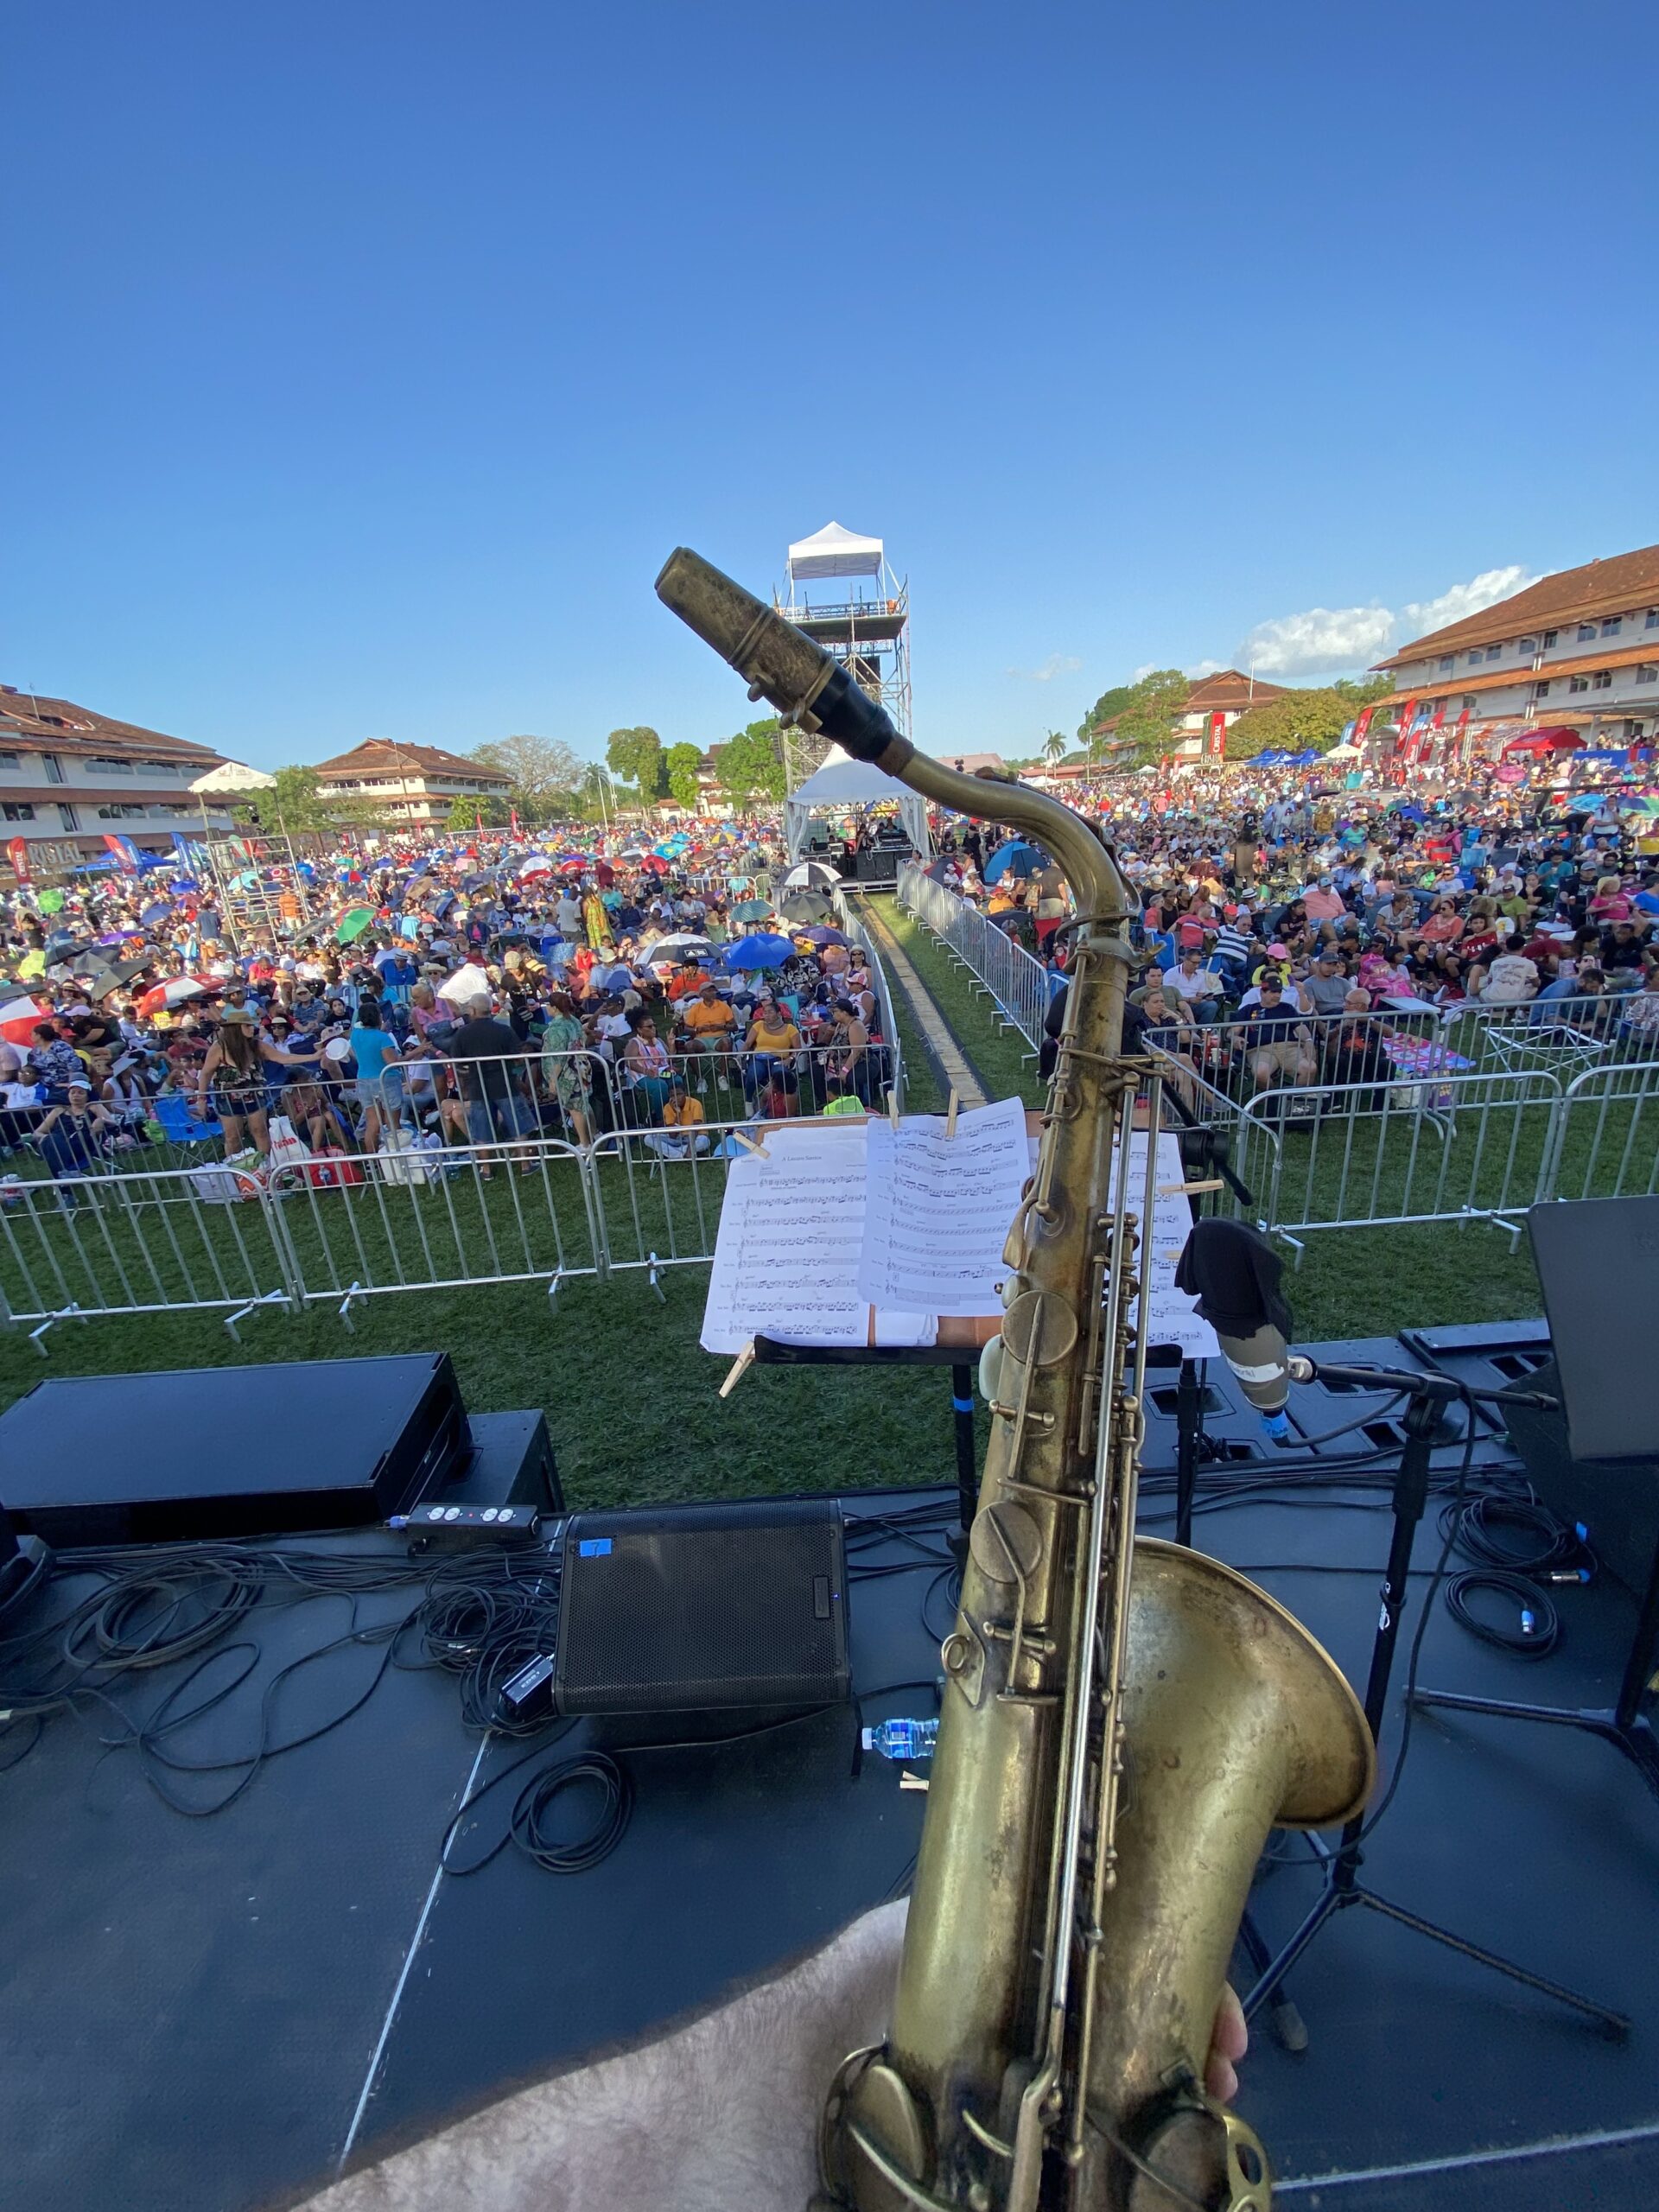 Jazz saxophonist Hunter McKay takes an “instrument selfie” in front of the closing concert crowd at the 2023 Panama Jazz Festival.